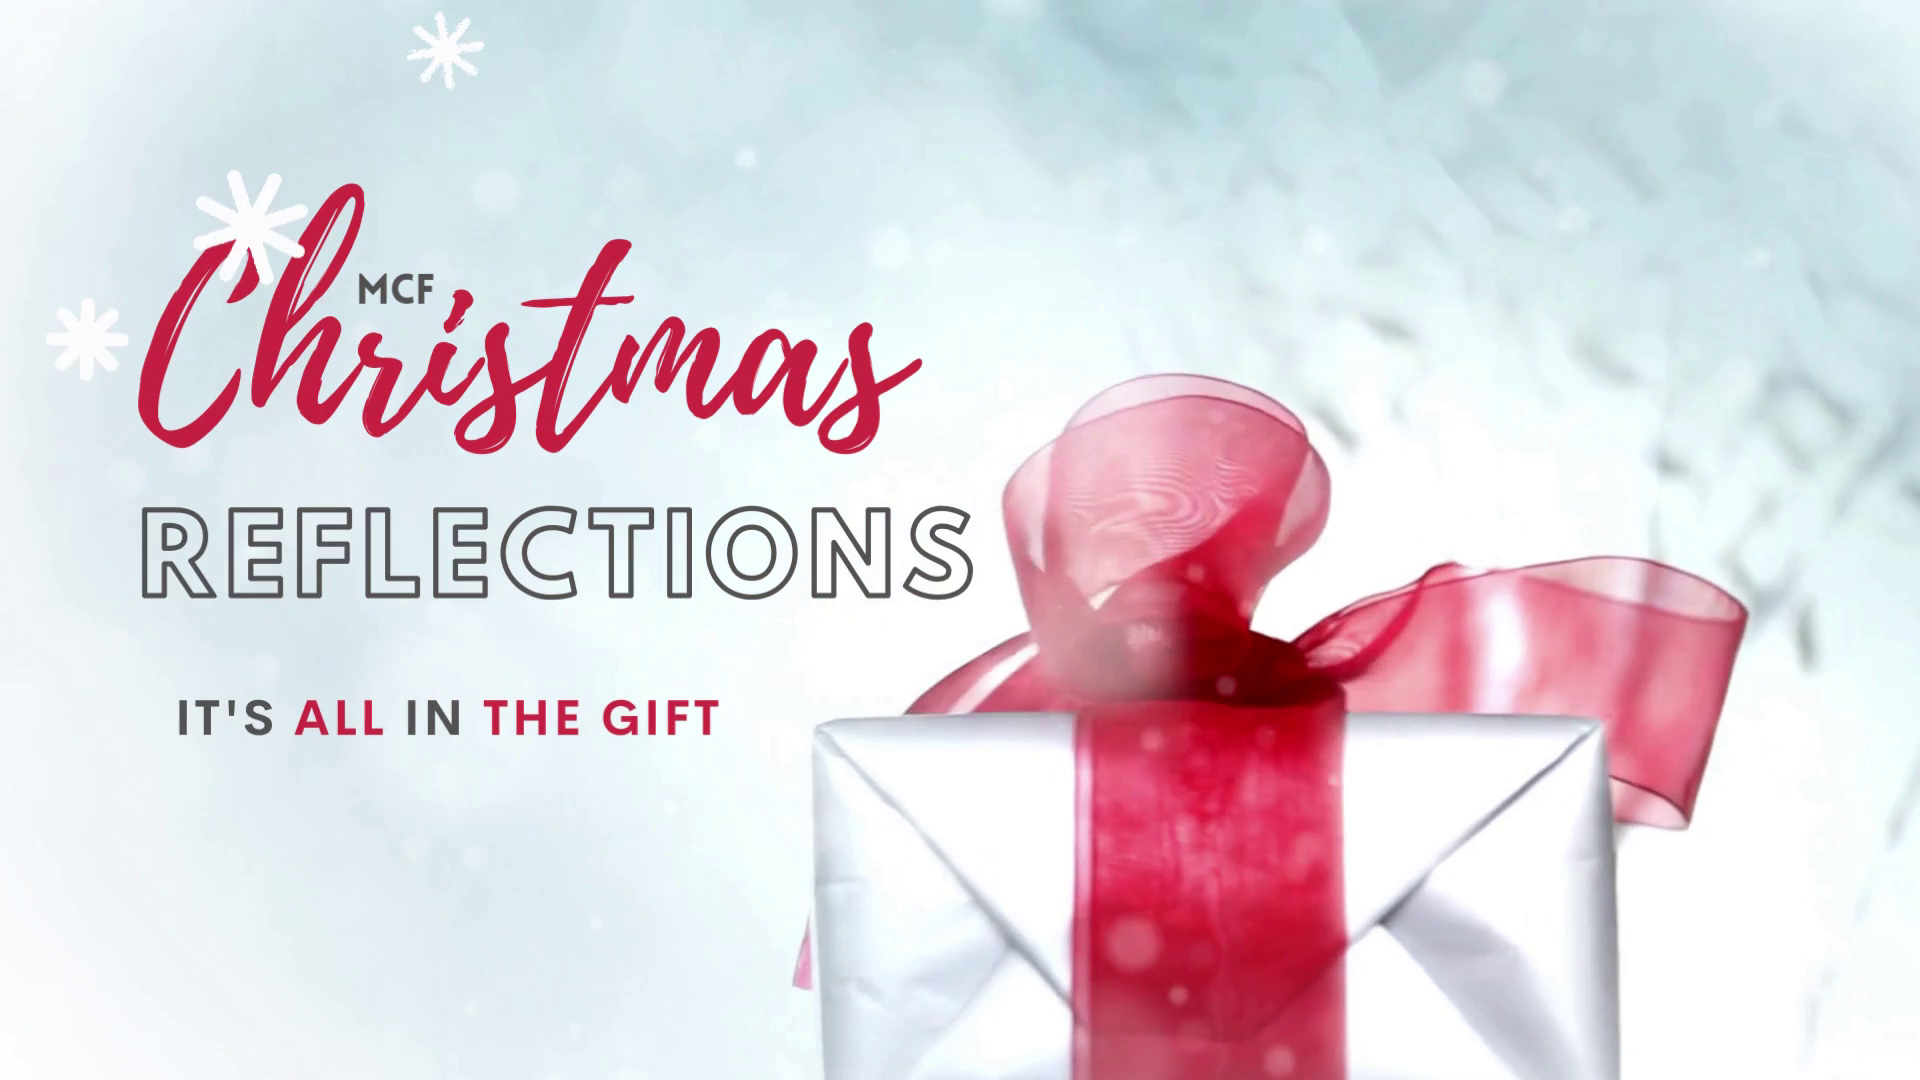 It’s all in the gift – 11th Dec Reflections   Gregor Woods